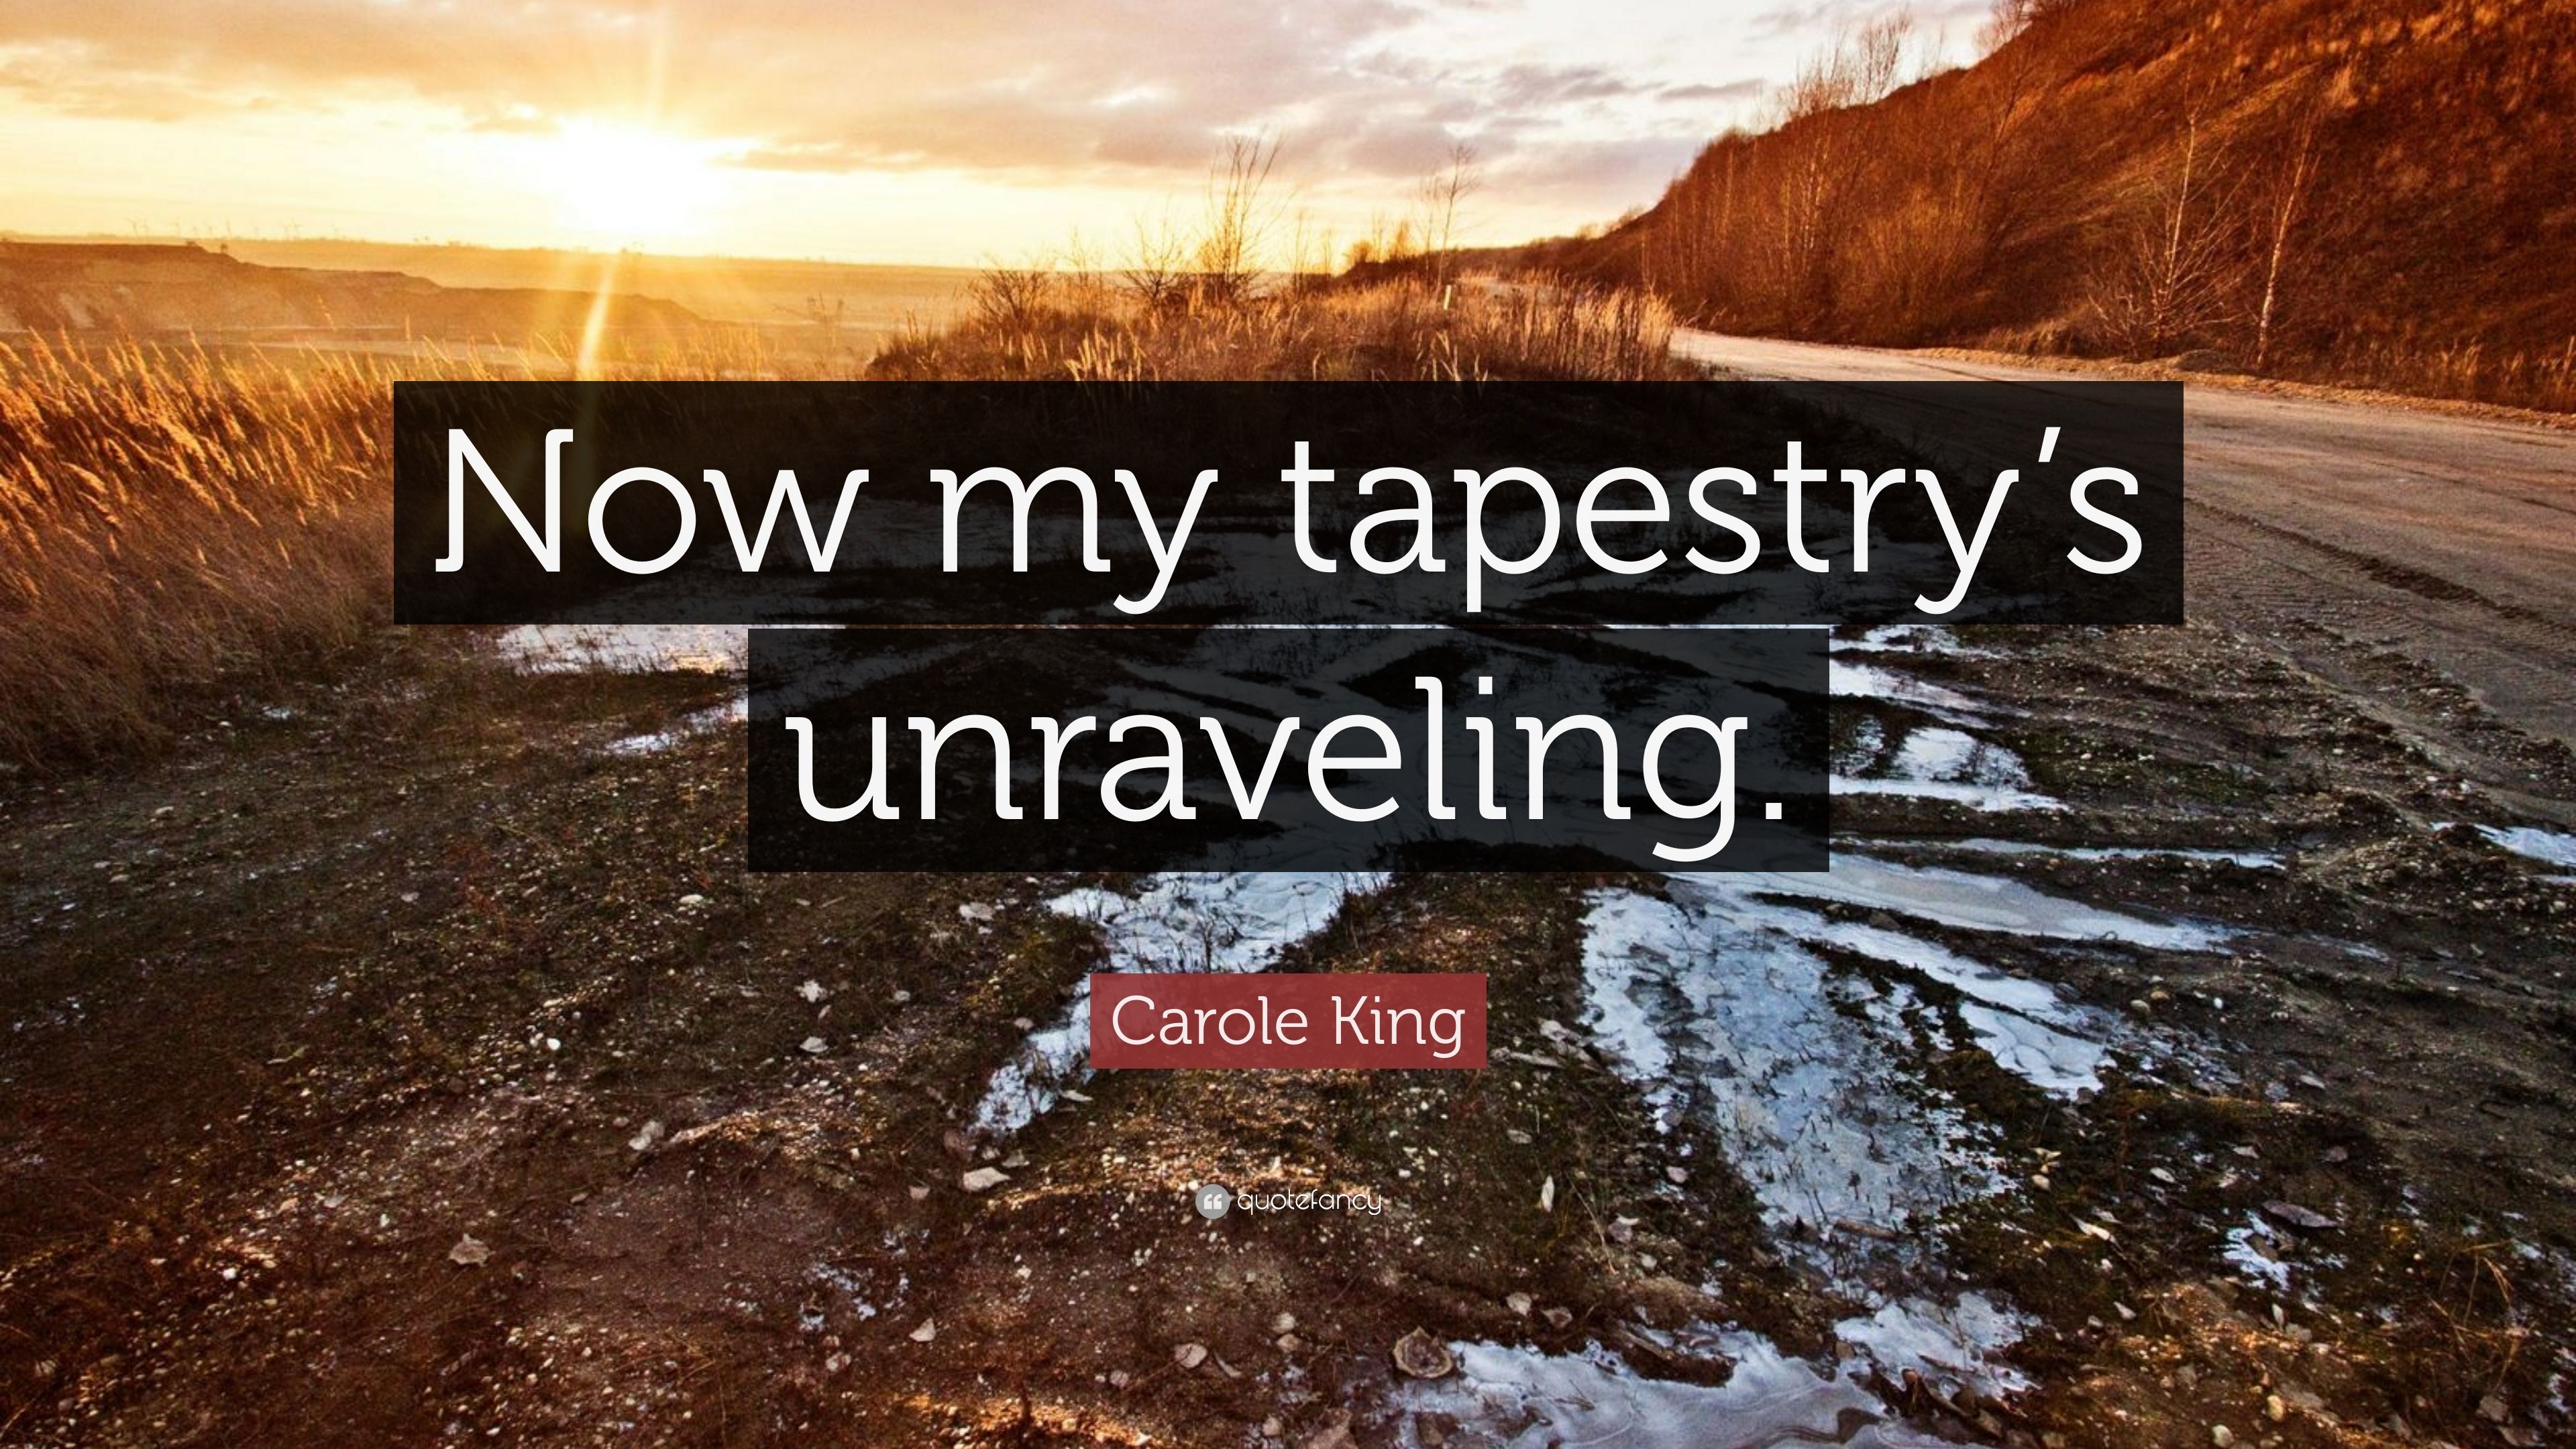 Carole King Quote: “Now my tapestry's unraveling.” 9 wallpaper